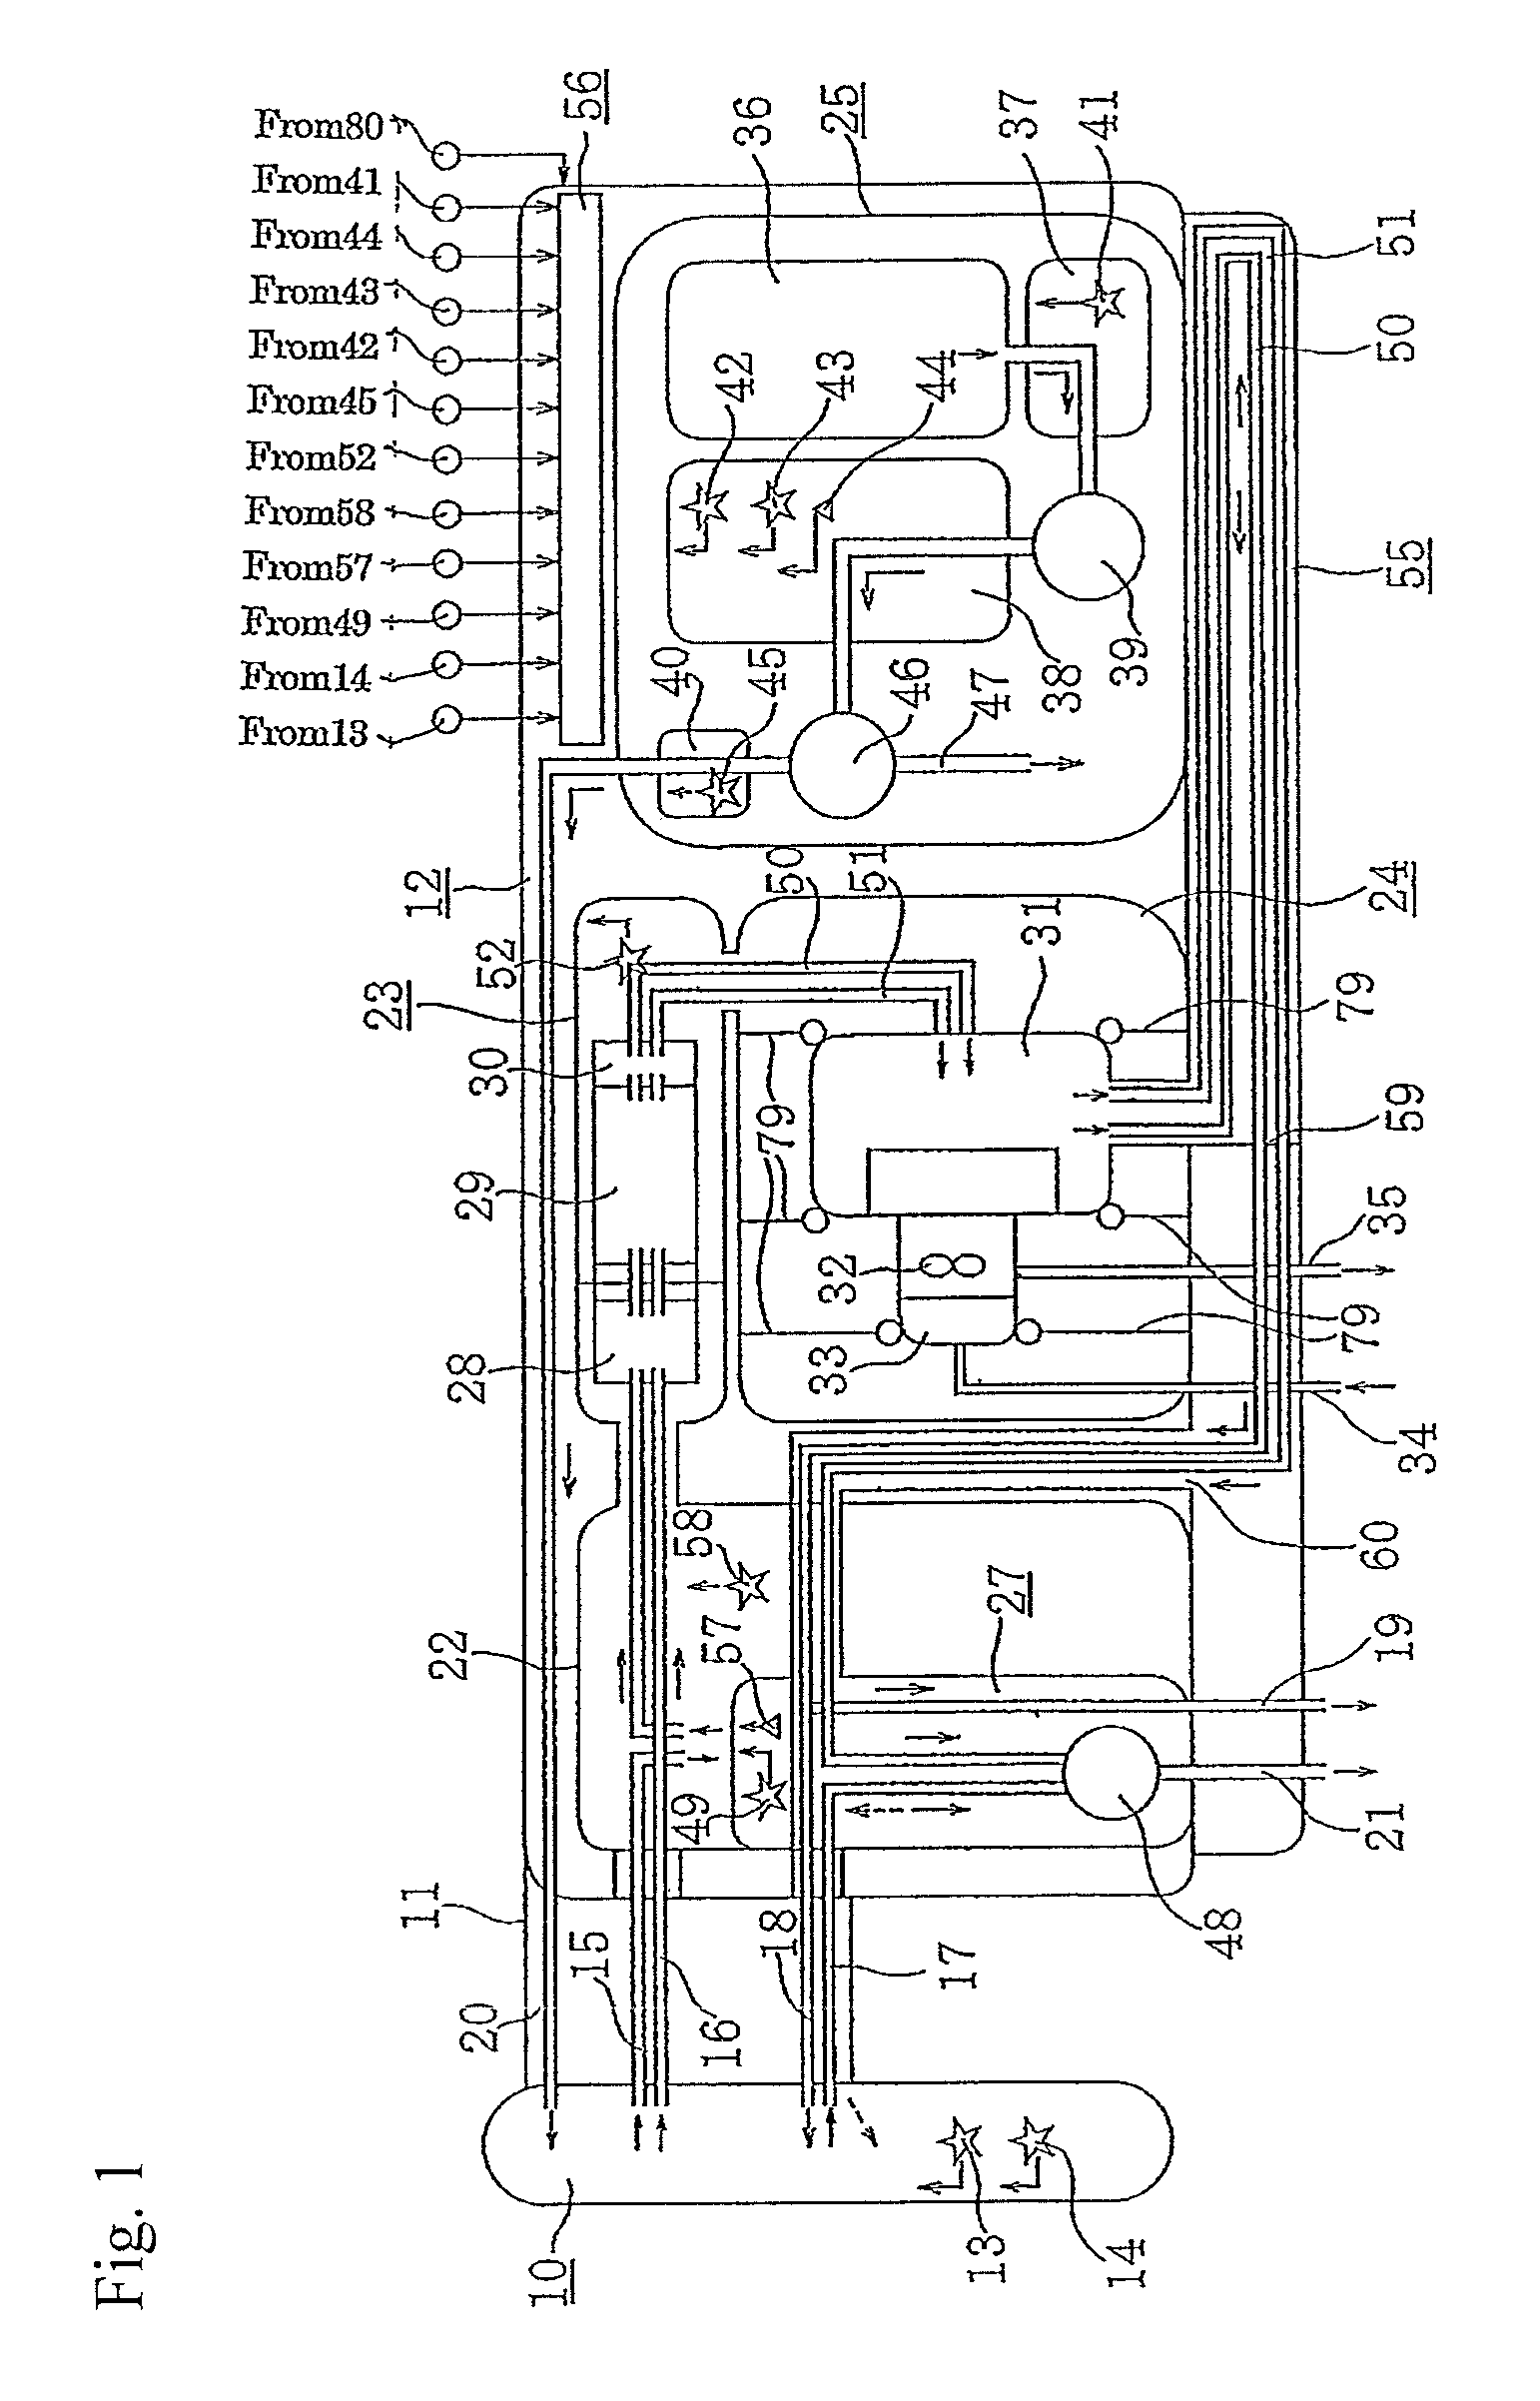 Processing equipment of excretory substances and the method